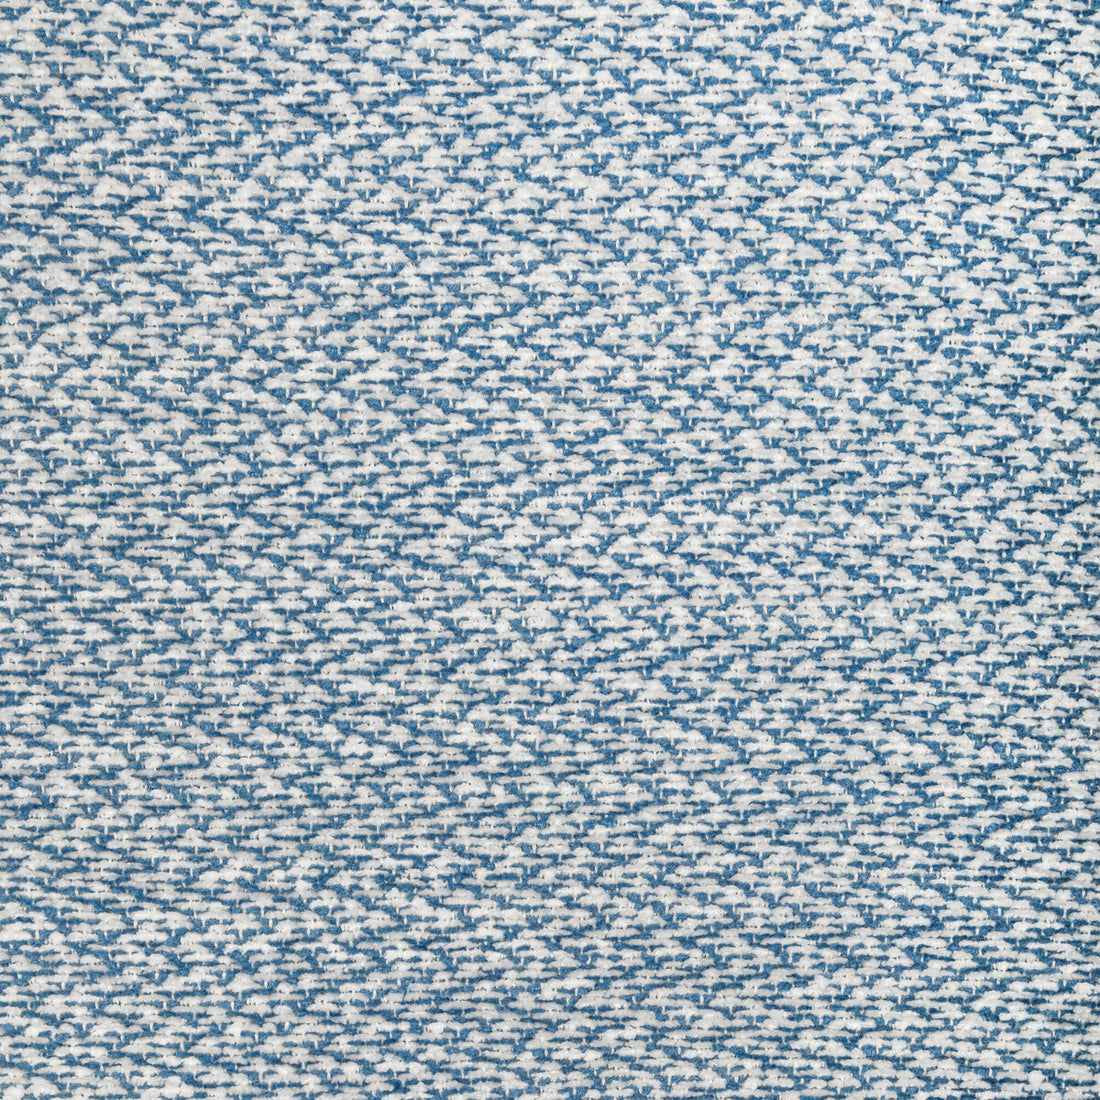 Sasson Texture fabric in blue color - pattern 8022122.5.0 - by Brunschwig &amp; Fils in the Chambery Textures III collection